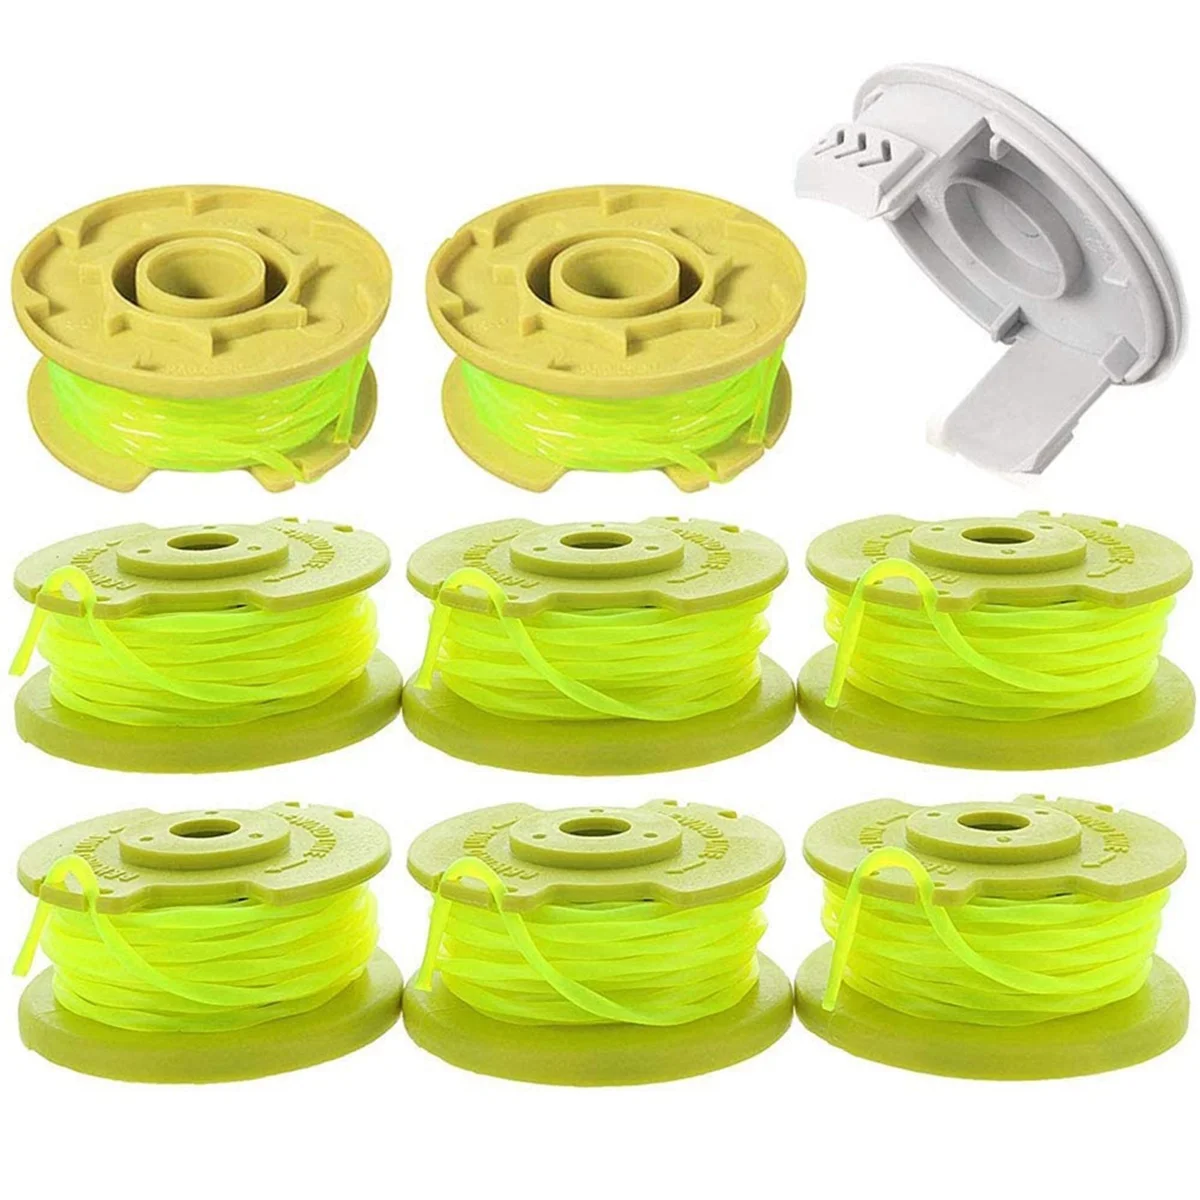 

8Pack Weed Eater Spool Replacement with Cap Covers Compatible with Ryobi One Plus+ AC80RL3 for Ryobi 18V, 24V, Trimmers